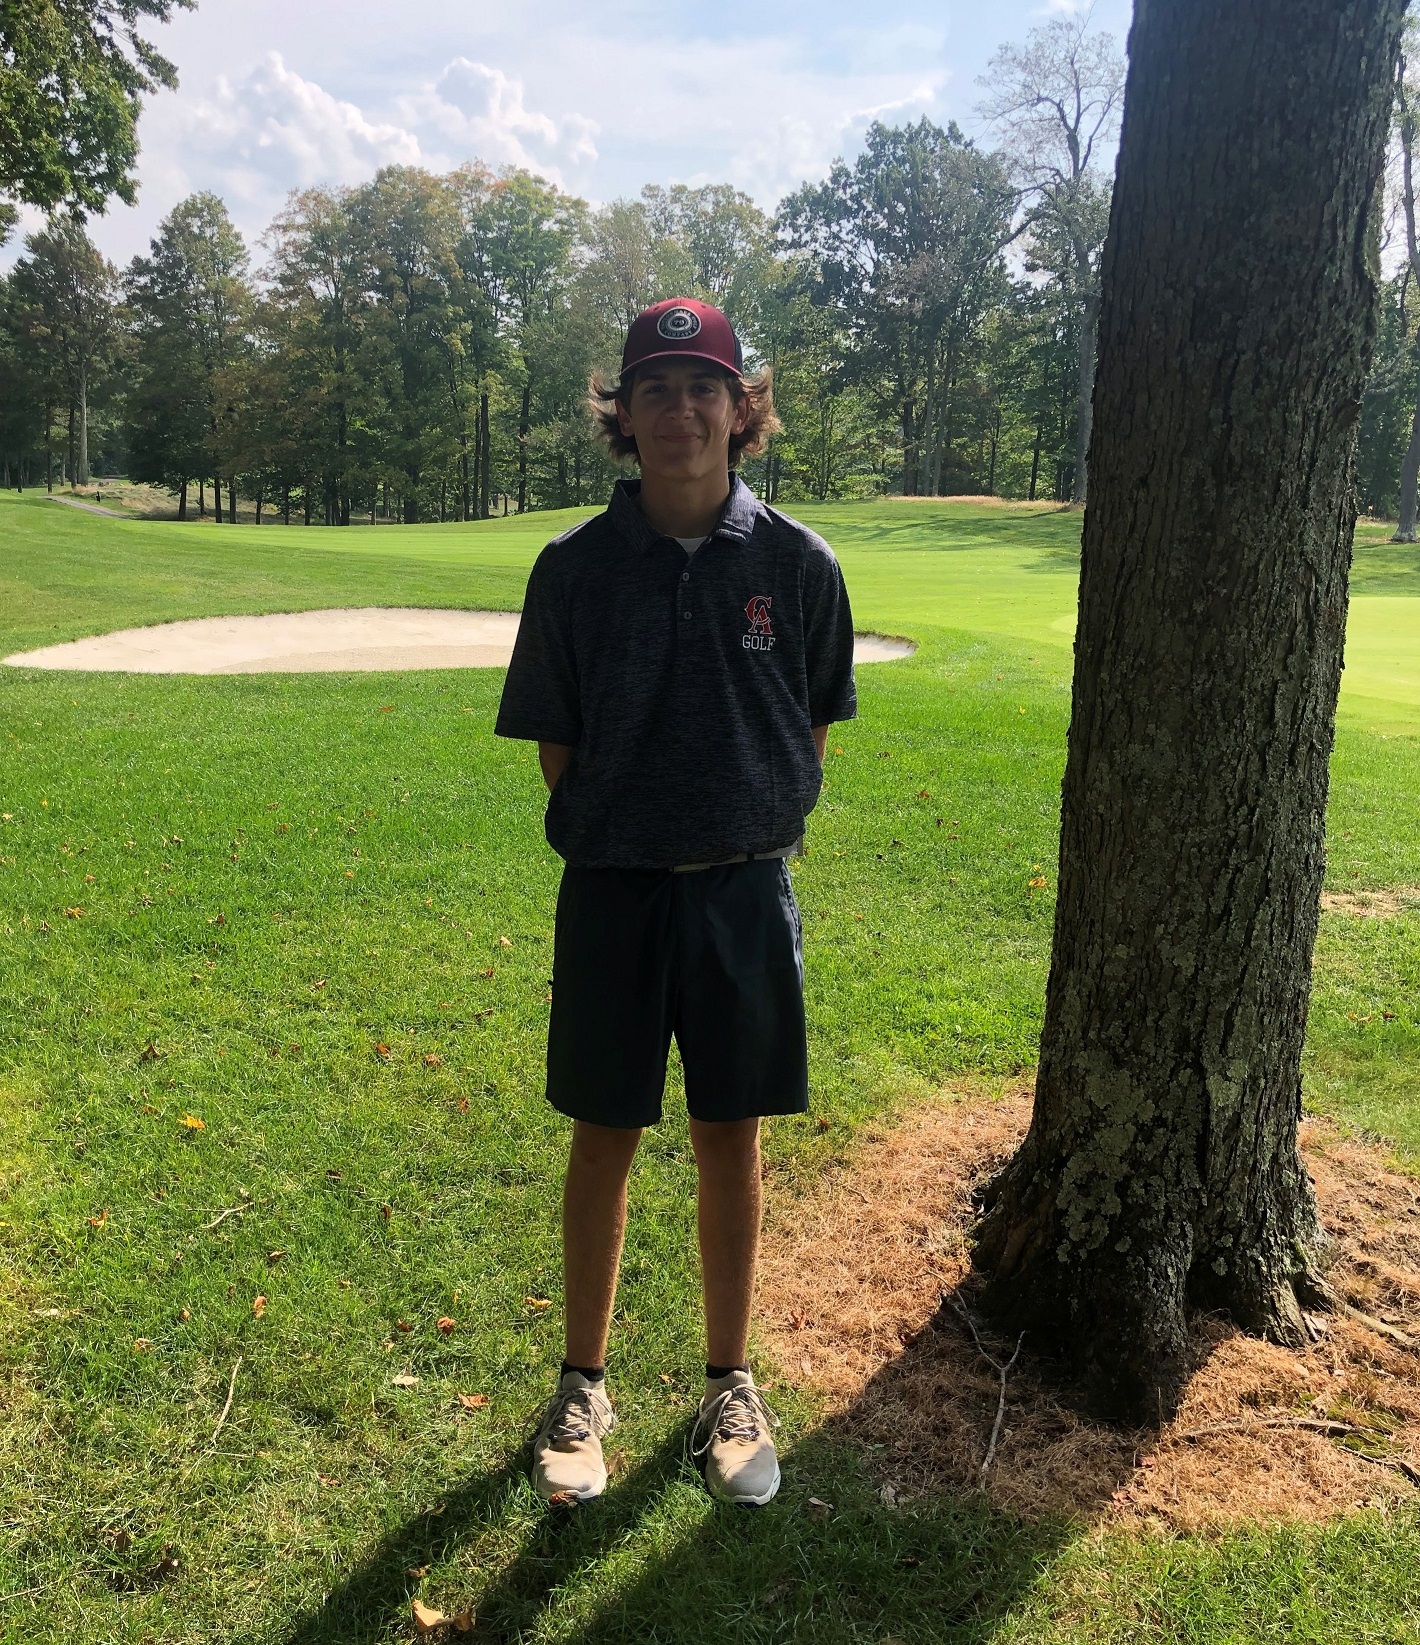 Totsky Qualifies for Golf District Championships